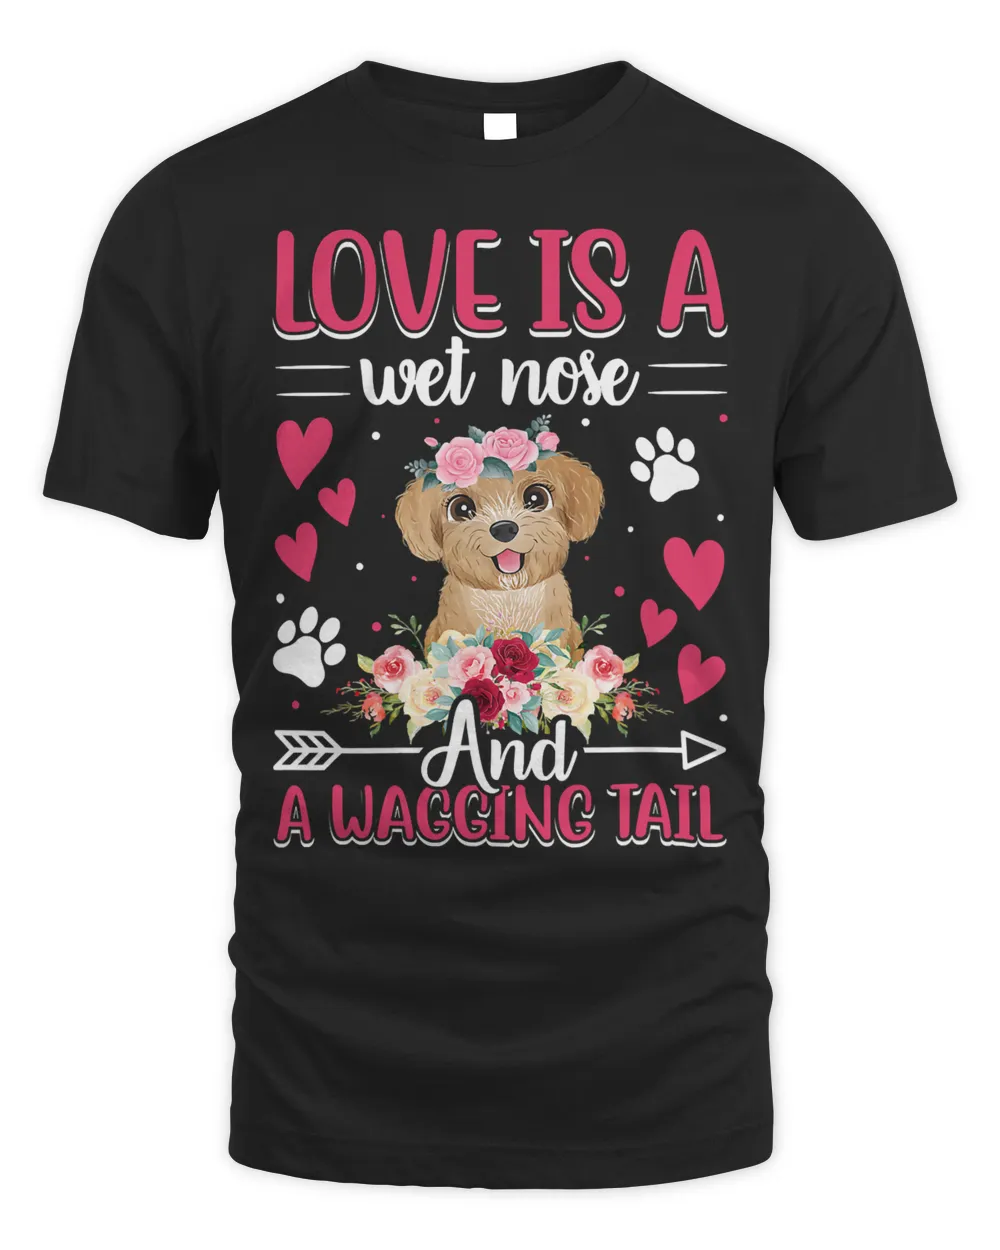 Poodle Love Is Wet Nose Wagging Tail Fun Dog Lover Graphic